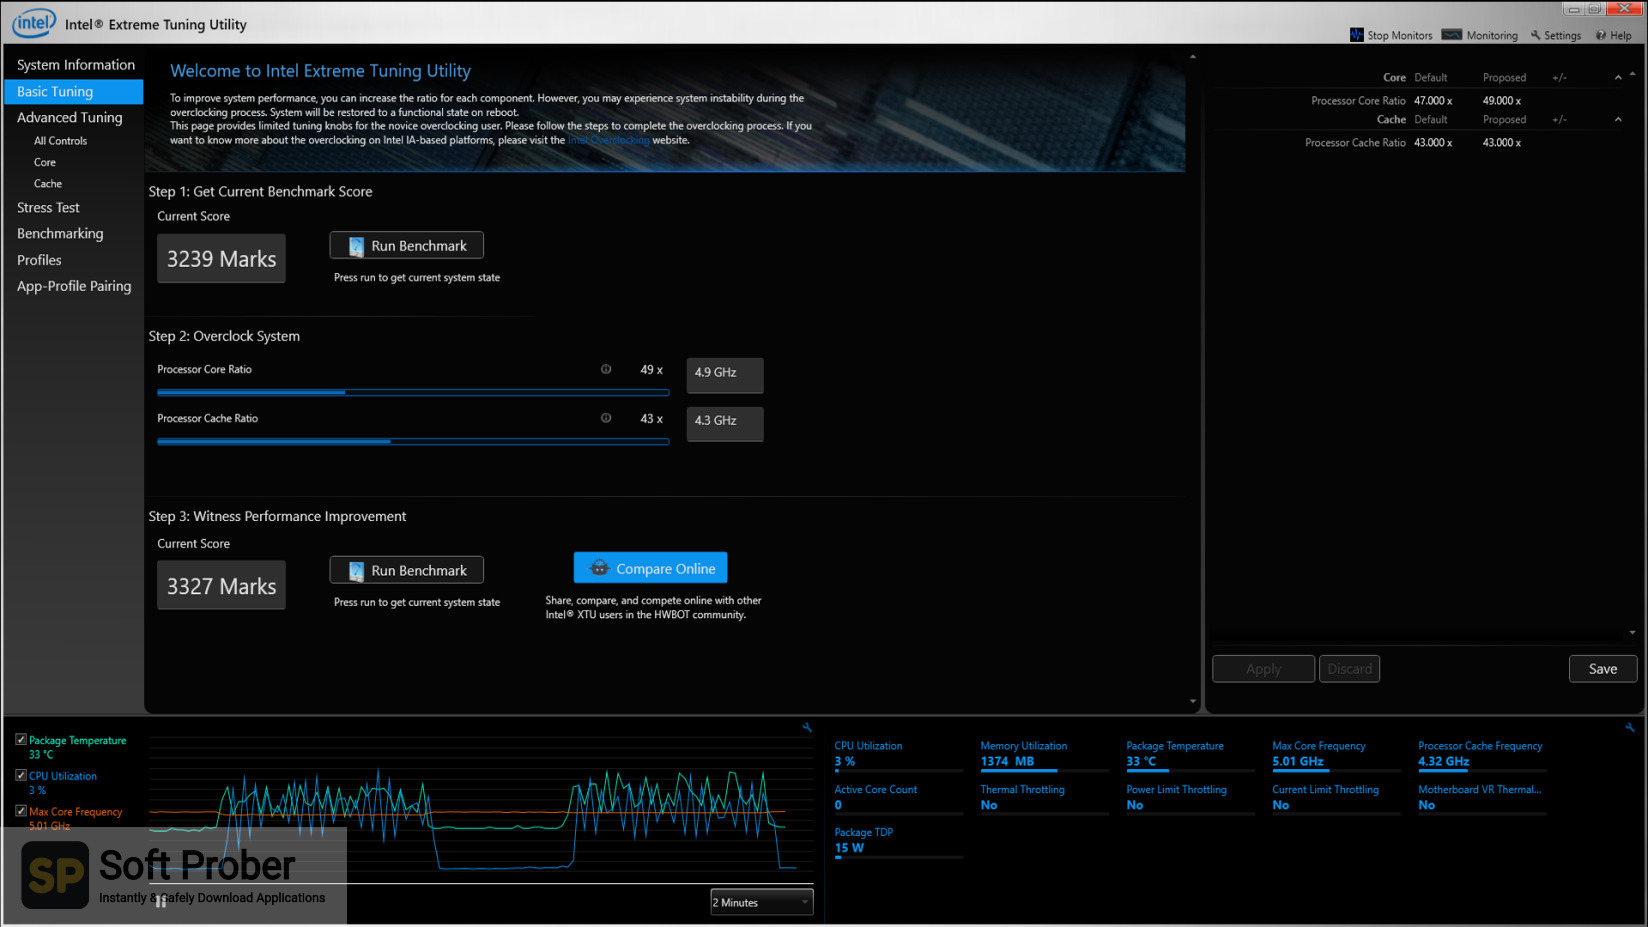 Intel Extreme Tuning Utility 7.12.0.29 instal the new for windows